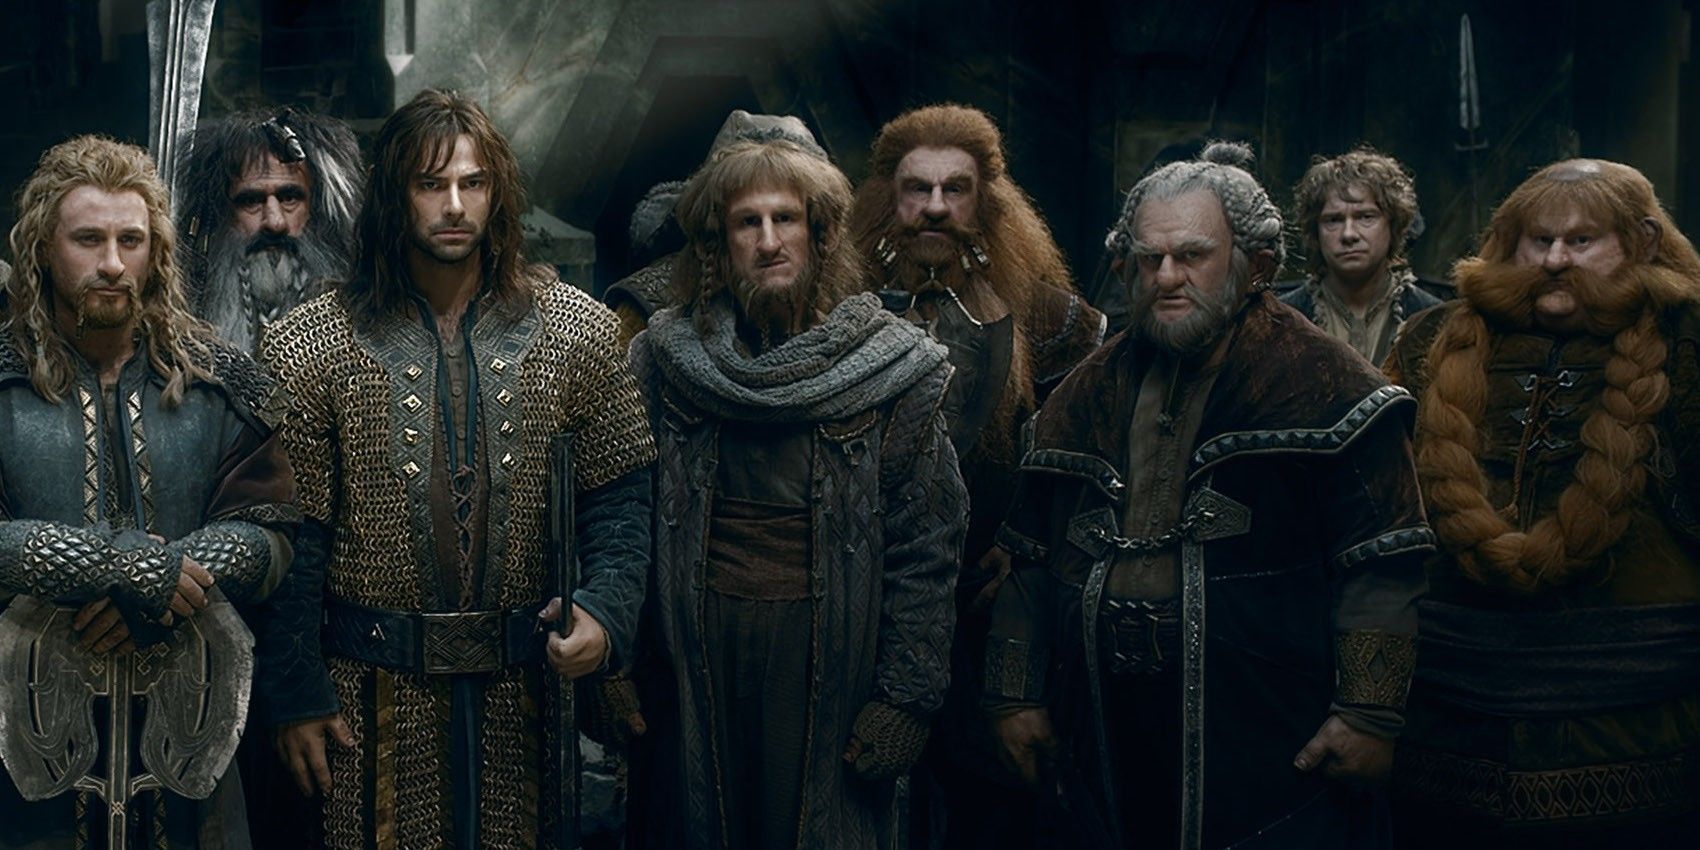 An image of the Dwarves in The Hobbit